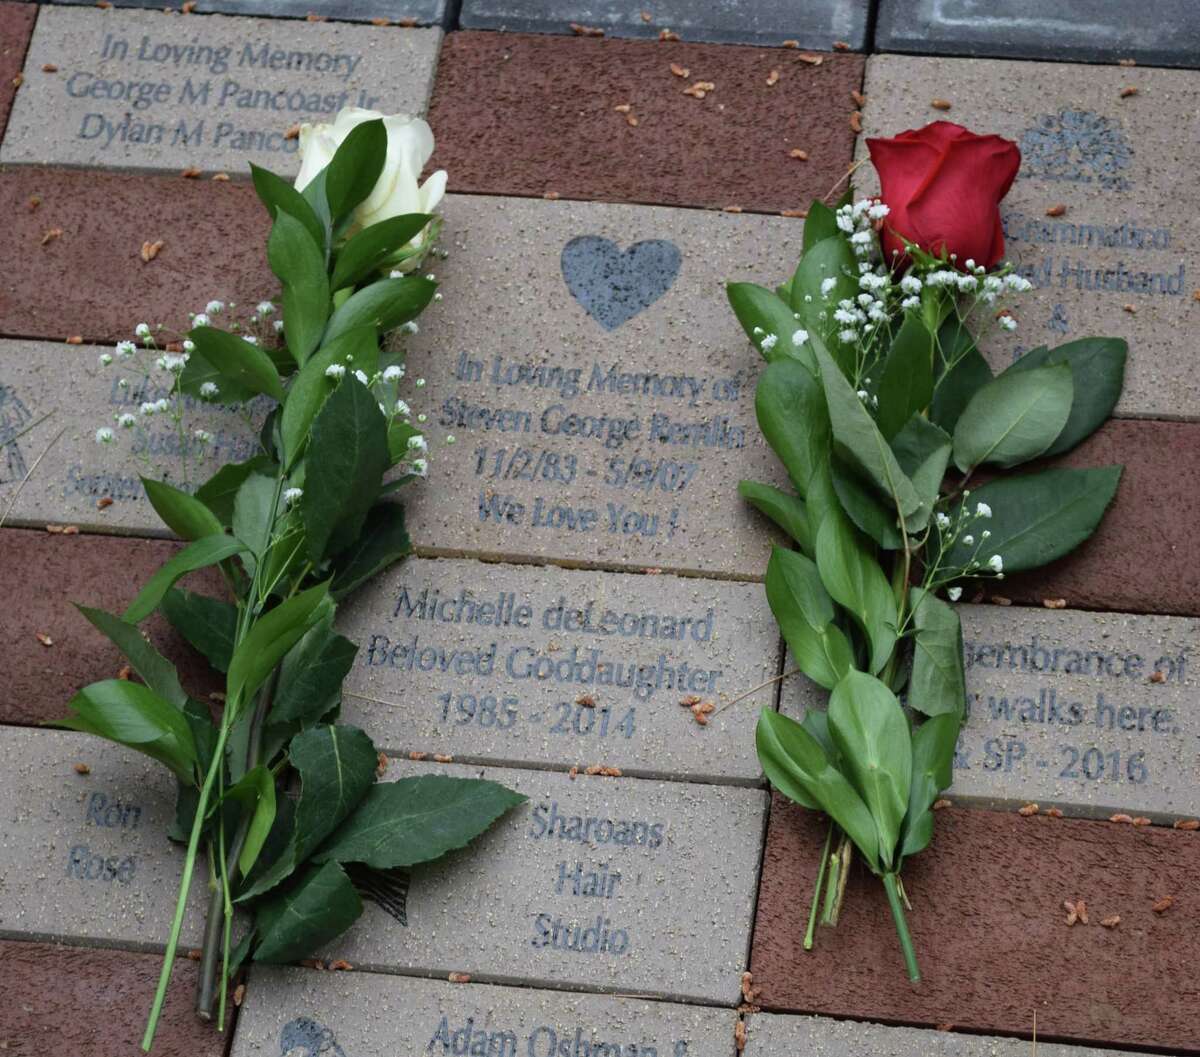 Roses convey a poignant message left by a guest at the dedication ceremony.